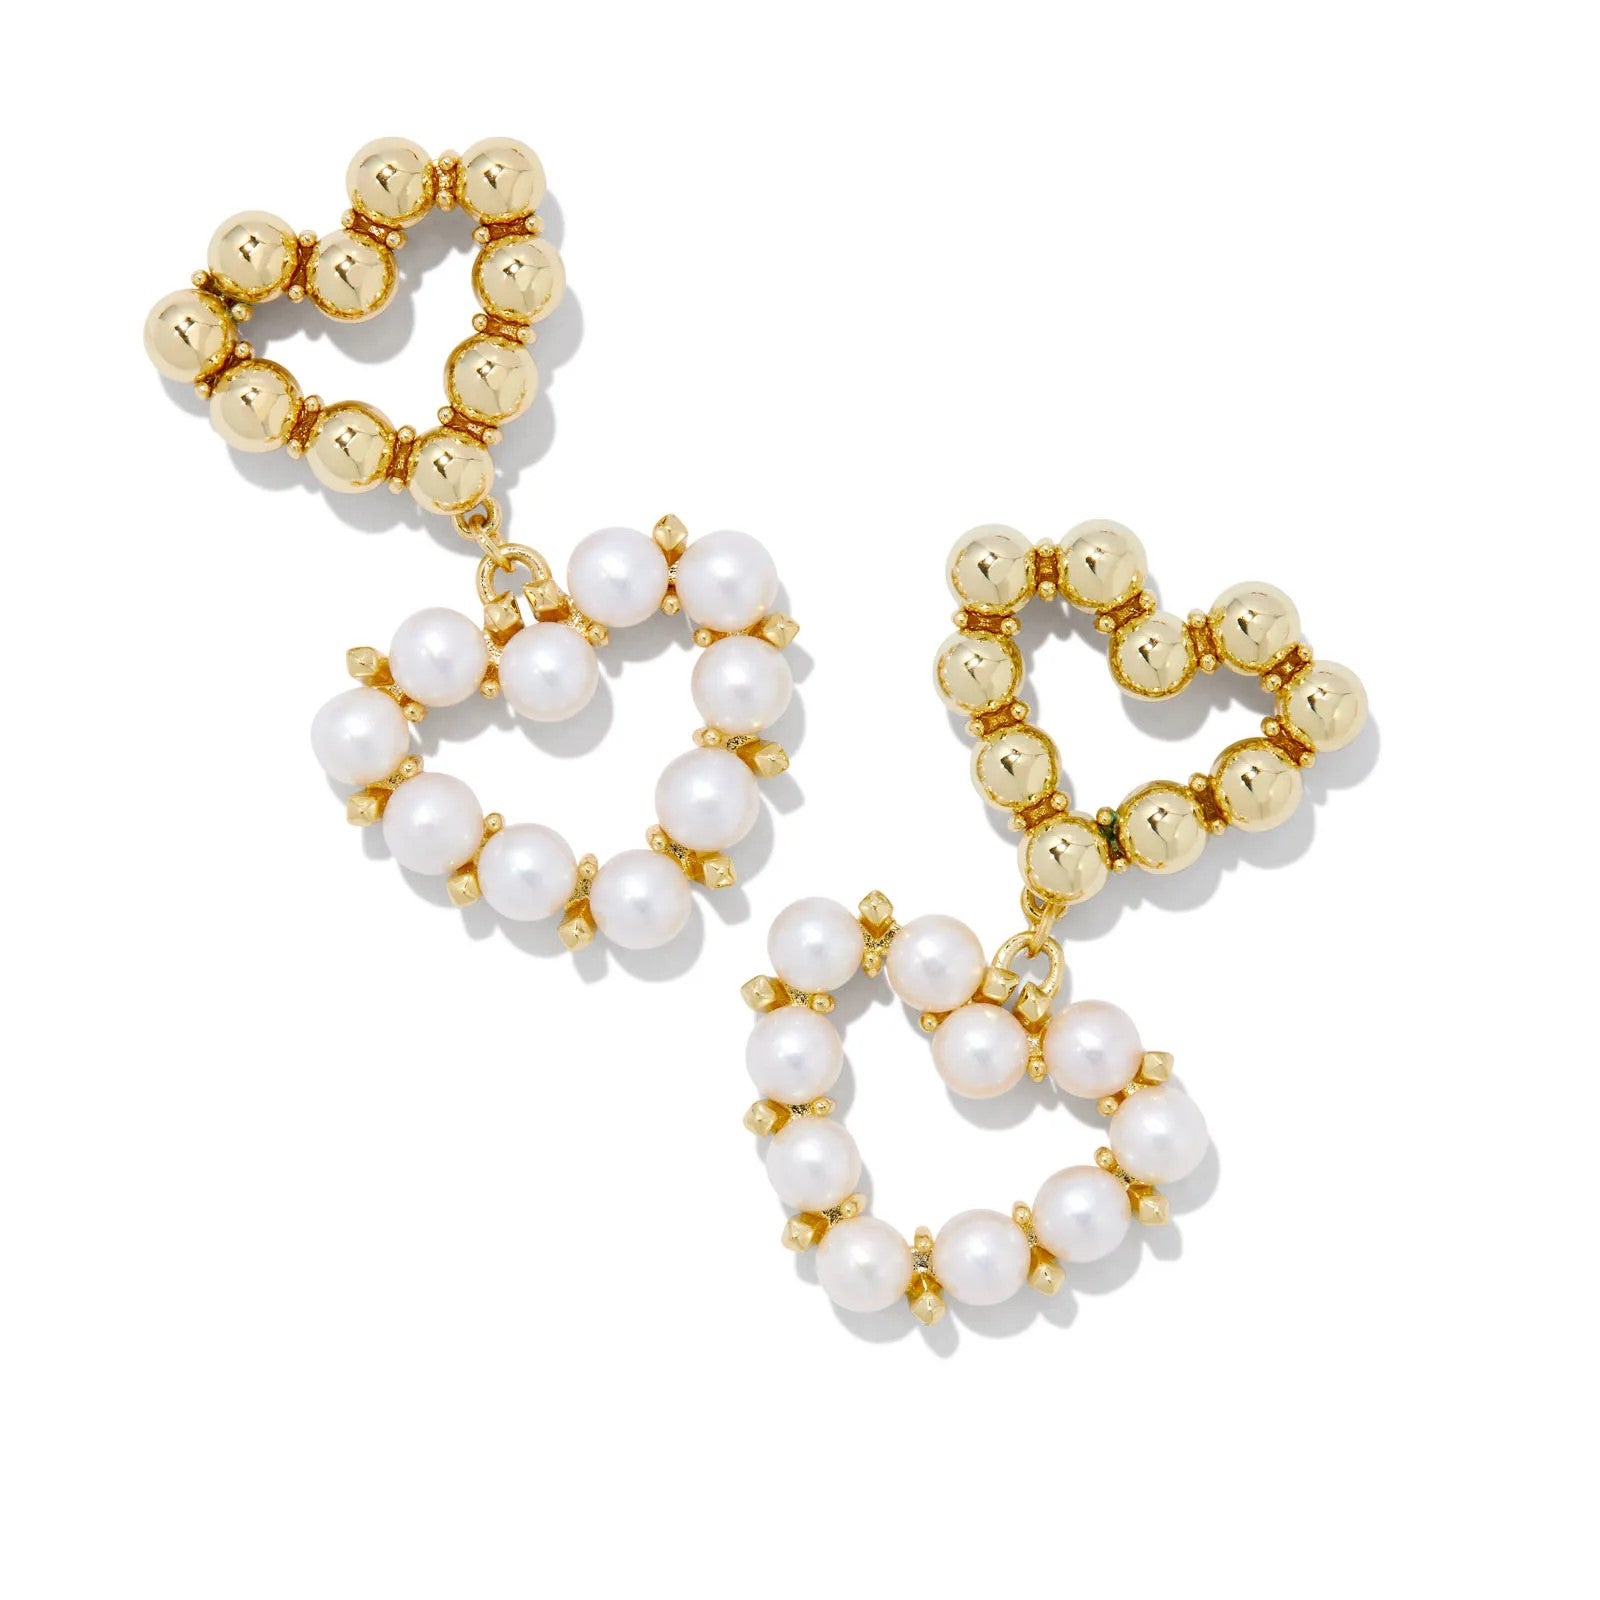 Kendra Scott | Ashton Gold Heart Drop Earrings in White Pearl - Giddy Up Glamour Boutique